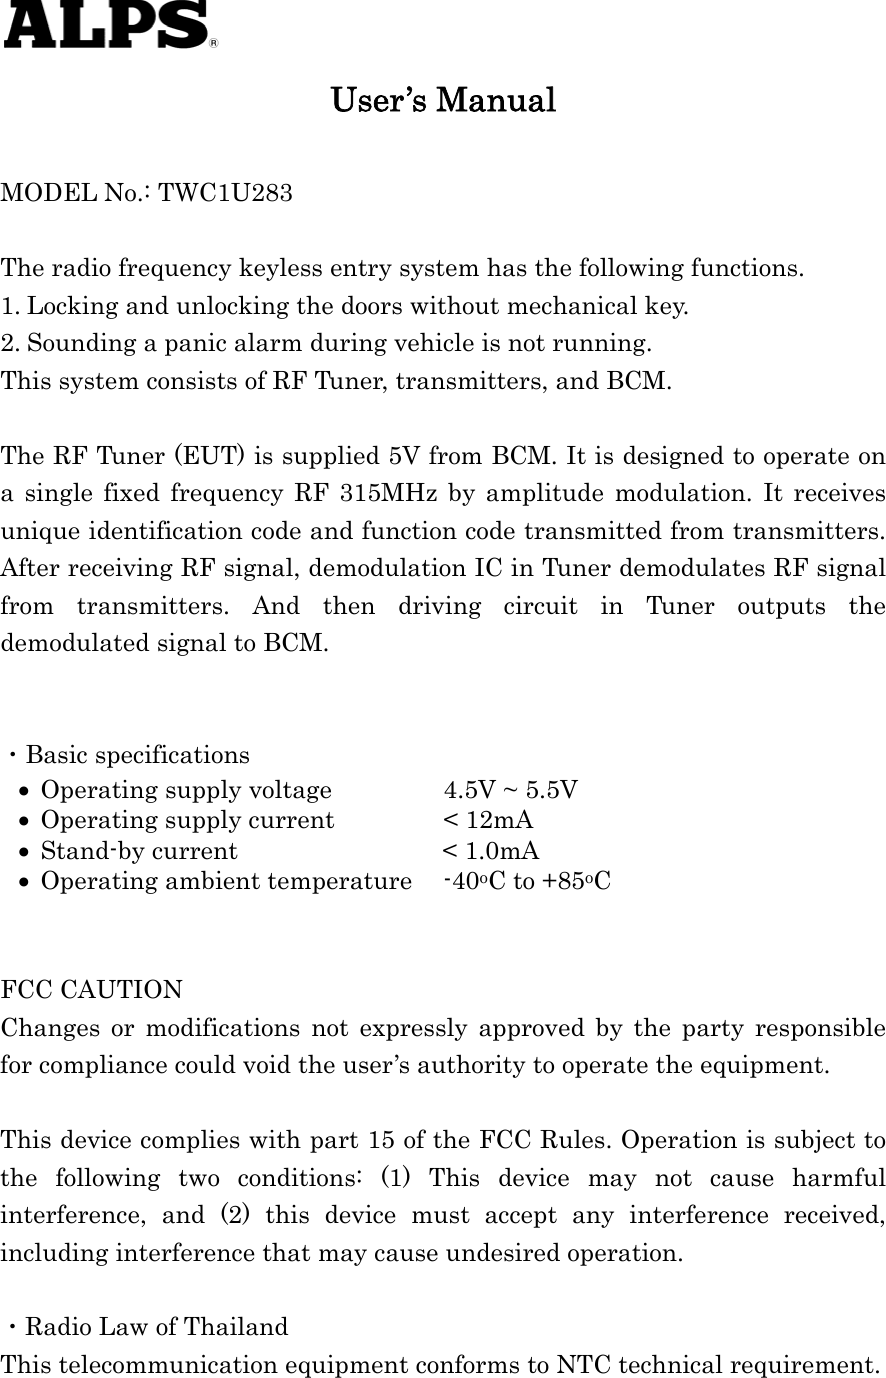    User’s Manual  MODEL No.: TWC1U283  The radio frequency keyless entry system has the following functions. 1. Locking and unlocking the doors without mechanical key. 2. Sounding a panic alarm during vehicle is not running. This system consists of RF Tuner, transmitters, and BCM.  The RF Tuner (EUT) is supplied 5V from BCM. It is designed to operate on a single fixed frequency RF 315MHz by amplitude modulation. It receives unique identification code and function code transmitted from transmitters. After receiving RF signal, demodulation IC in Tuner demodulates RF signal from transmitters. And then driving circuit in Tuner outputs the demodulated signal to BCM.   ・Basic specifications  Operating supply voltage    4.5V ~ 5.5V  Operating supply current    &lt; 12mA  Stand-by current           &lt; 1.0mA  Operating ambient temperature  -40oC to +85oC   FCC CAUTION Changes or modifications not expressly approved by the party responsible for compliance could void the user’s authority to operate the equipment.  This device complies with part 15 of the FCC Rules. Operation is subject to the following two conditions: (1) This device may not cause harmful interference, and (2) this device must accept any interference received, including interference that may cause undesired operation.  ・Radio Law of Thailand This telecommunication equipment conforms to NTC technical requirement.  